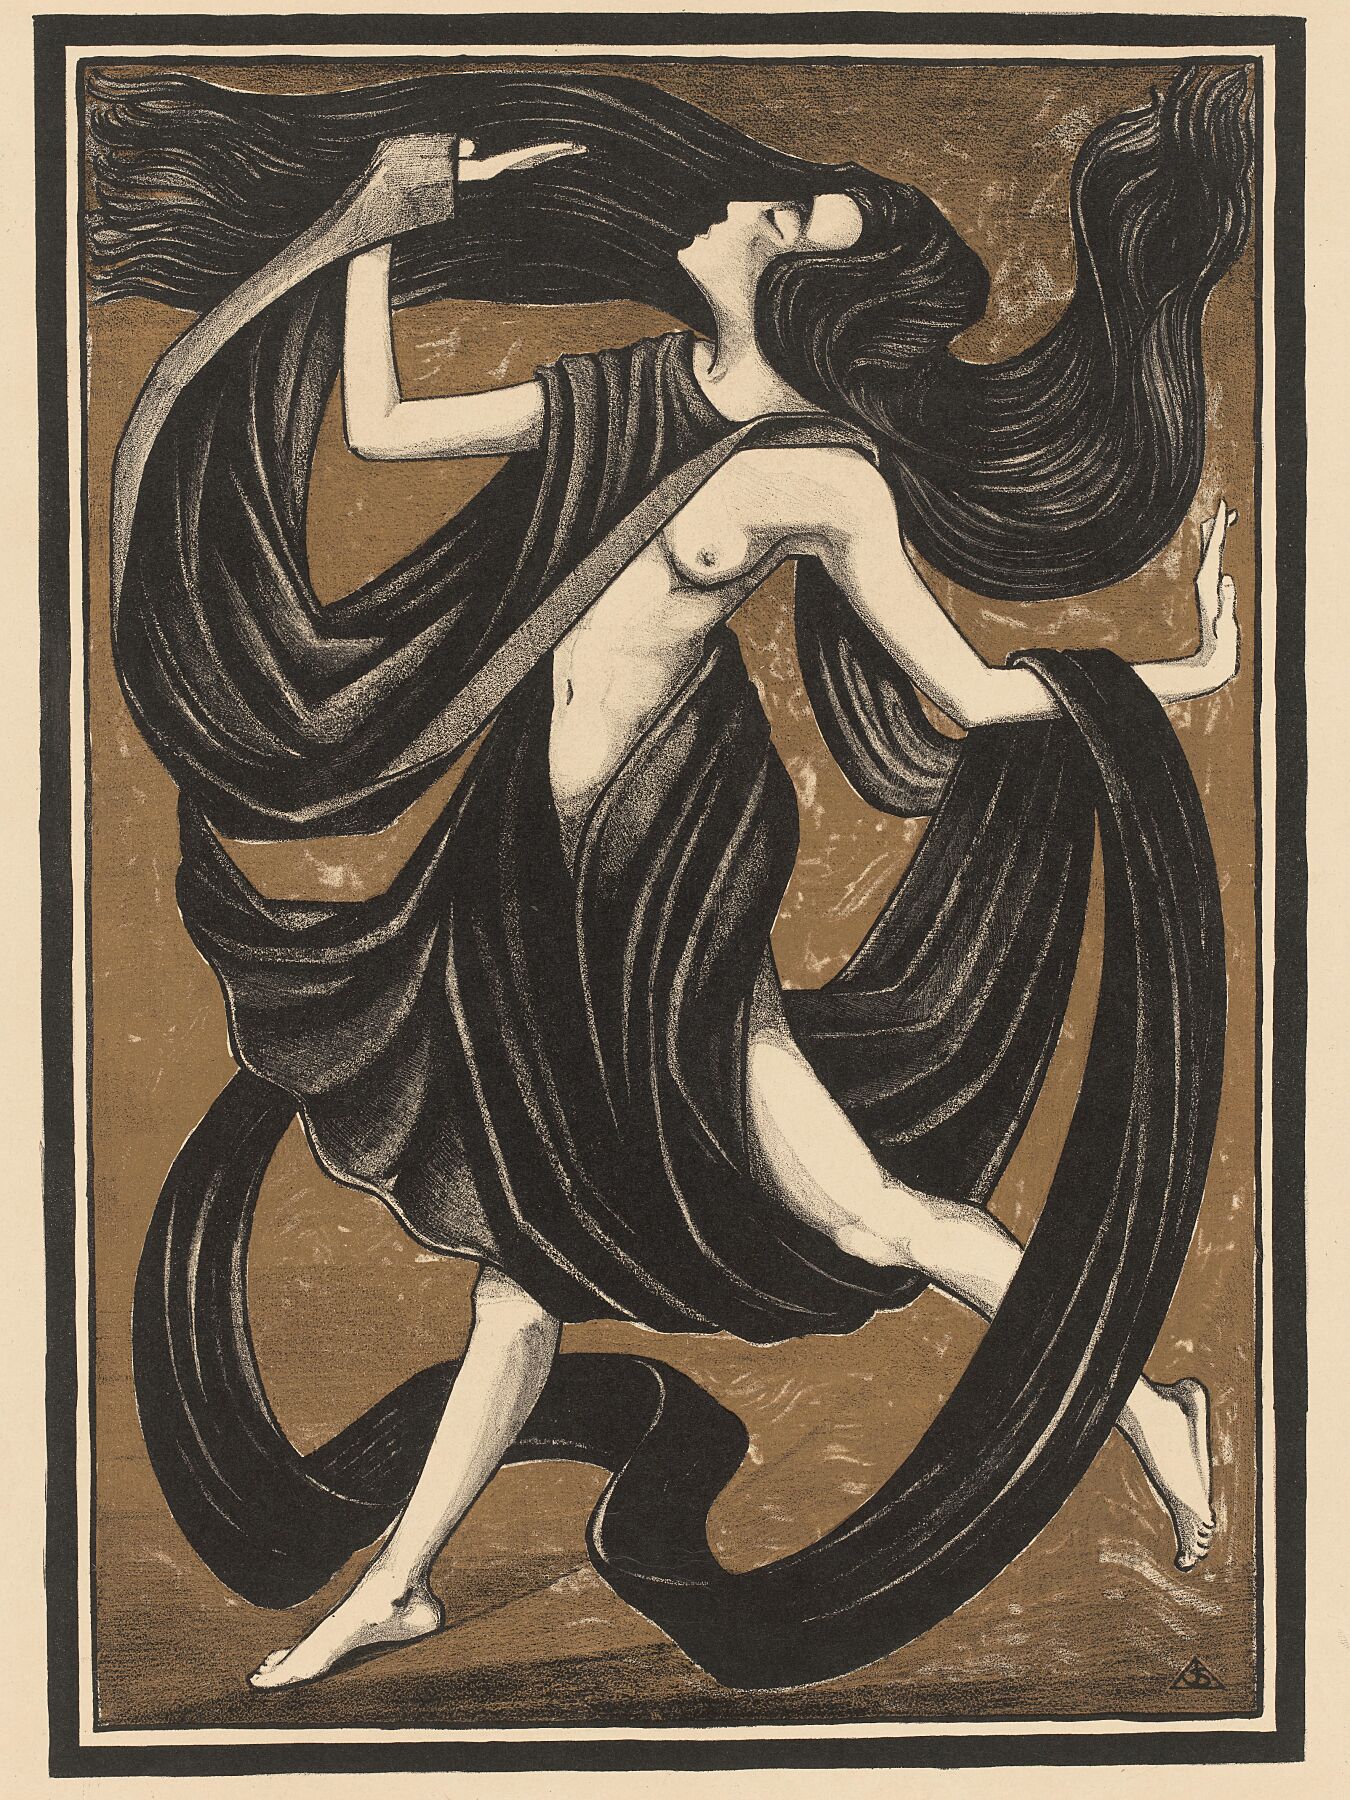 Dancer with Draperies by Henk Schilling - 1919